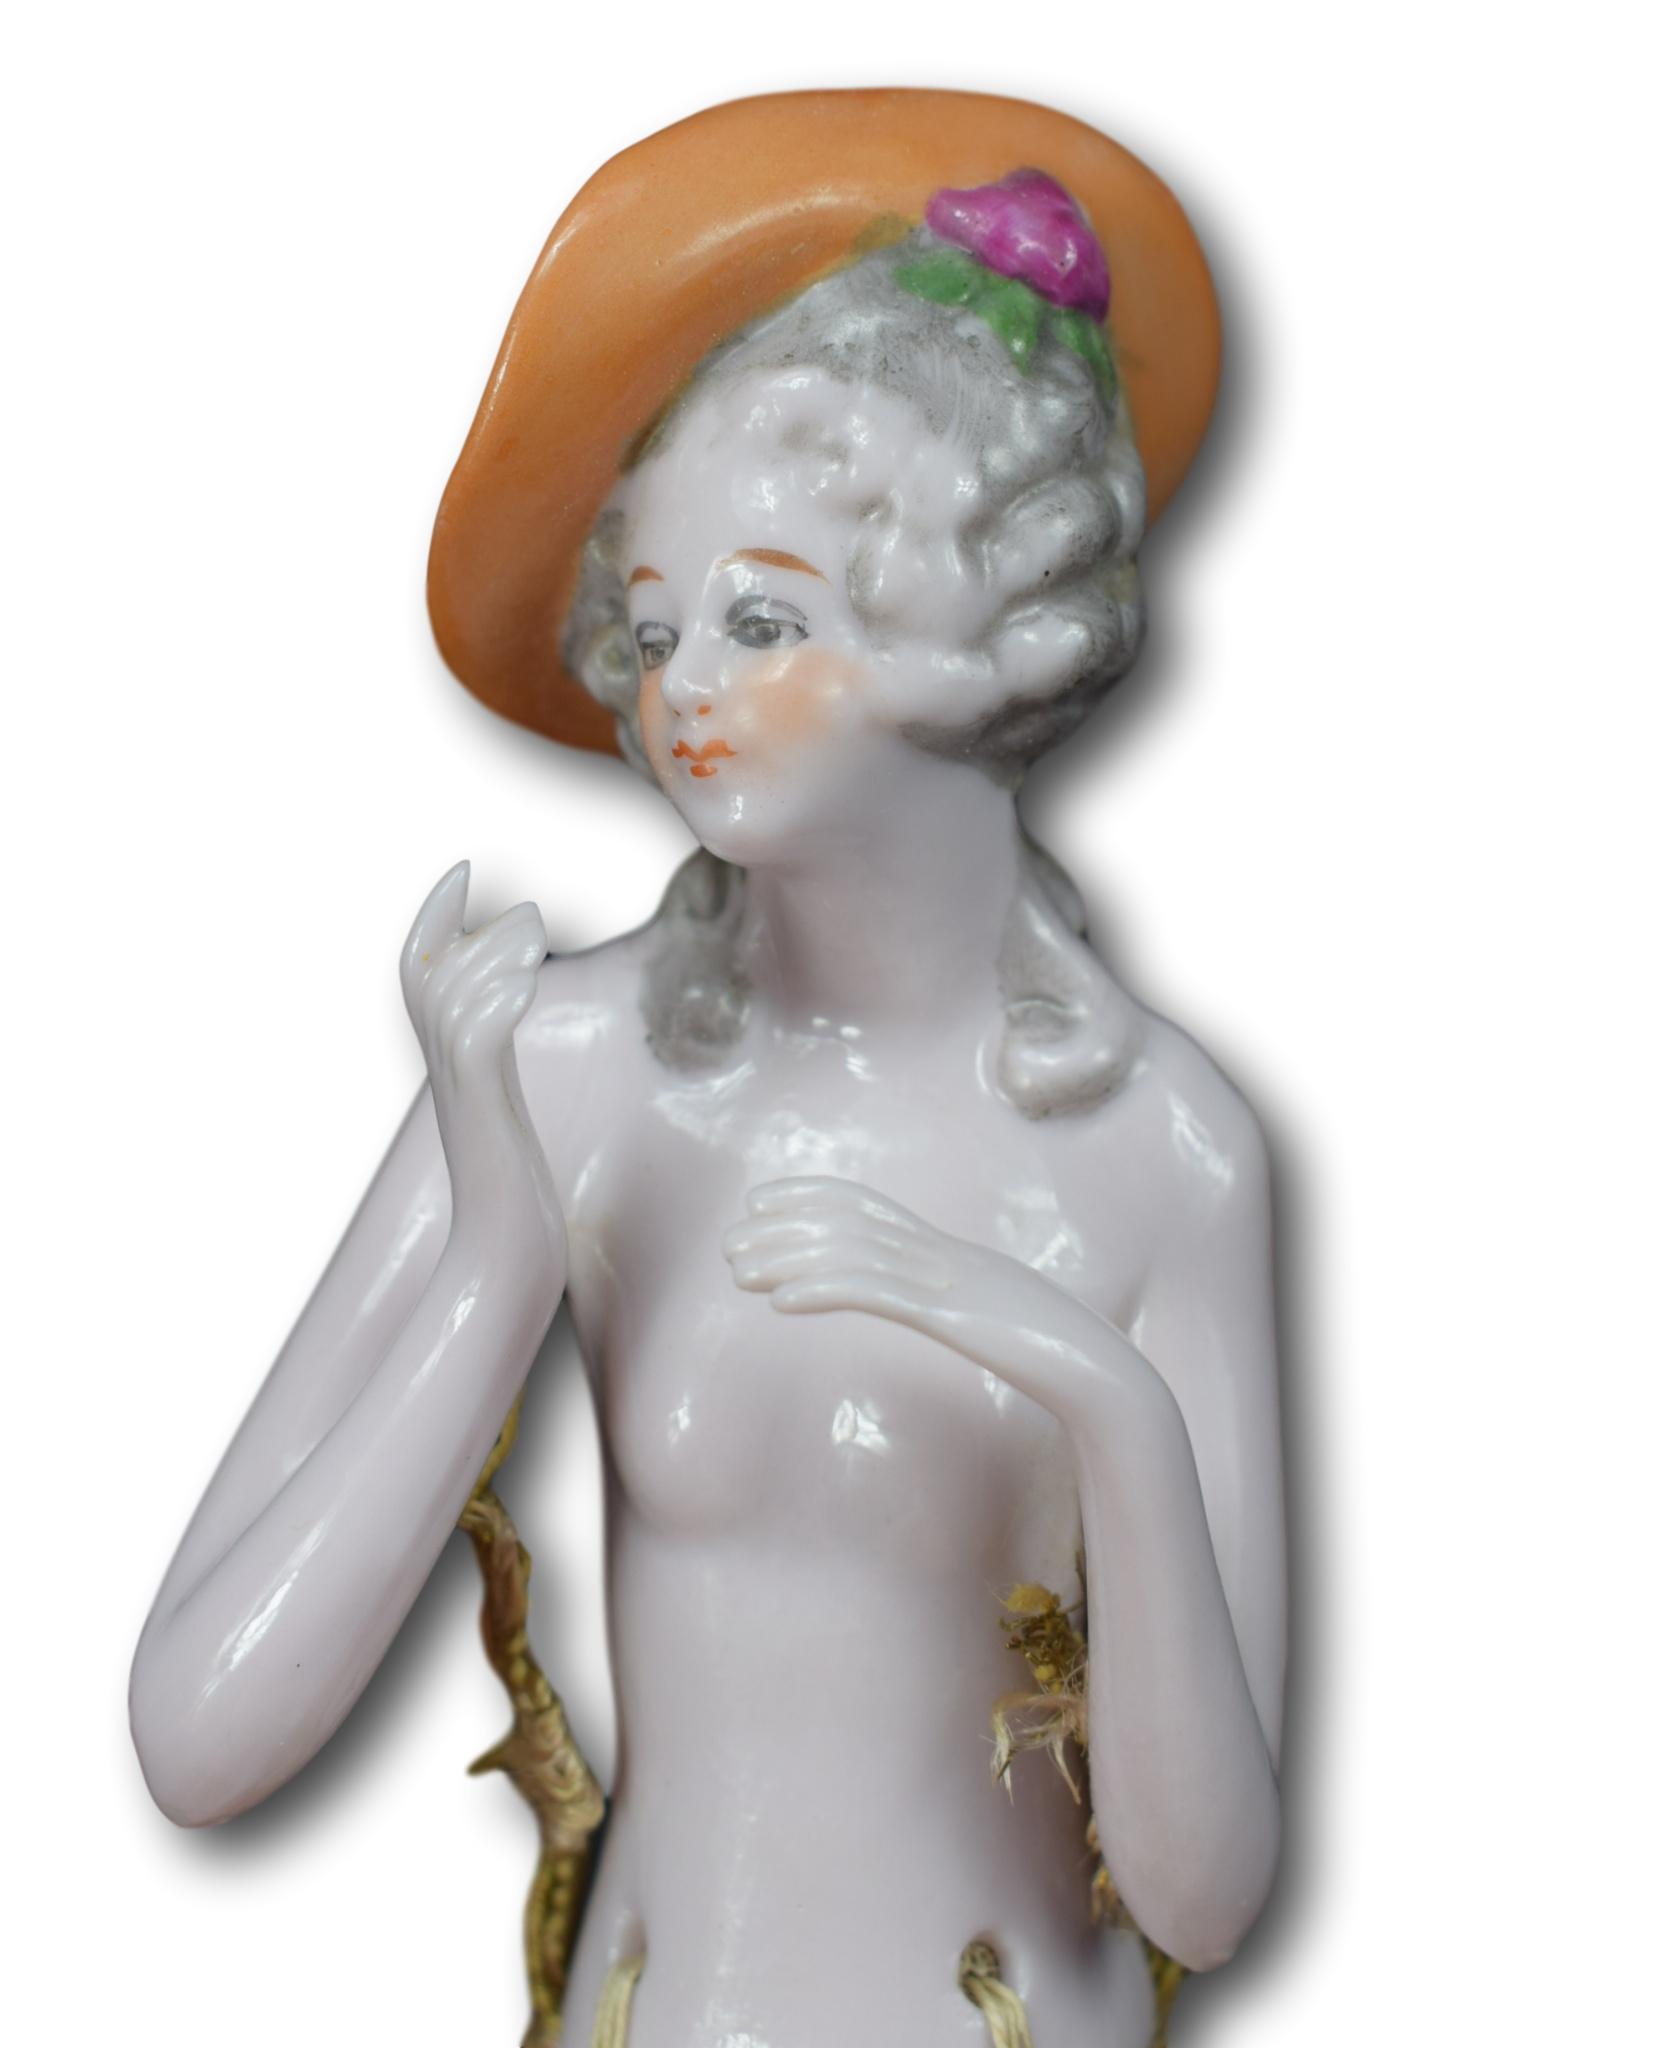 Half Doll with Legs - Charmantiques